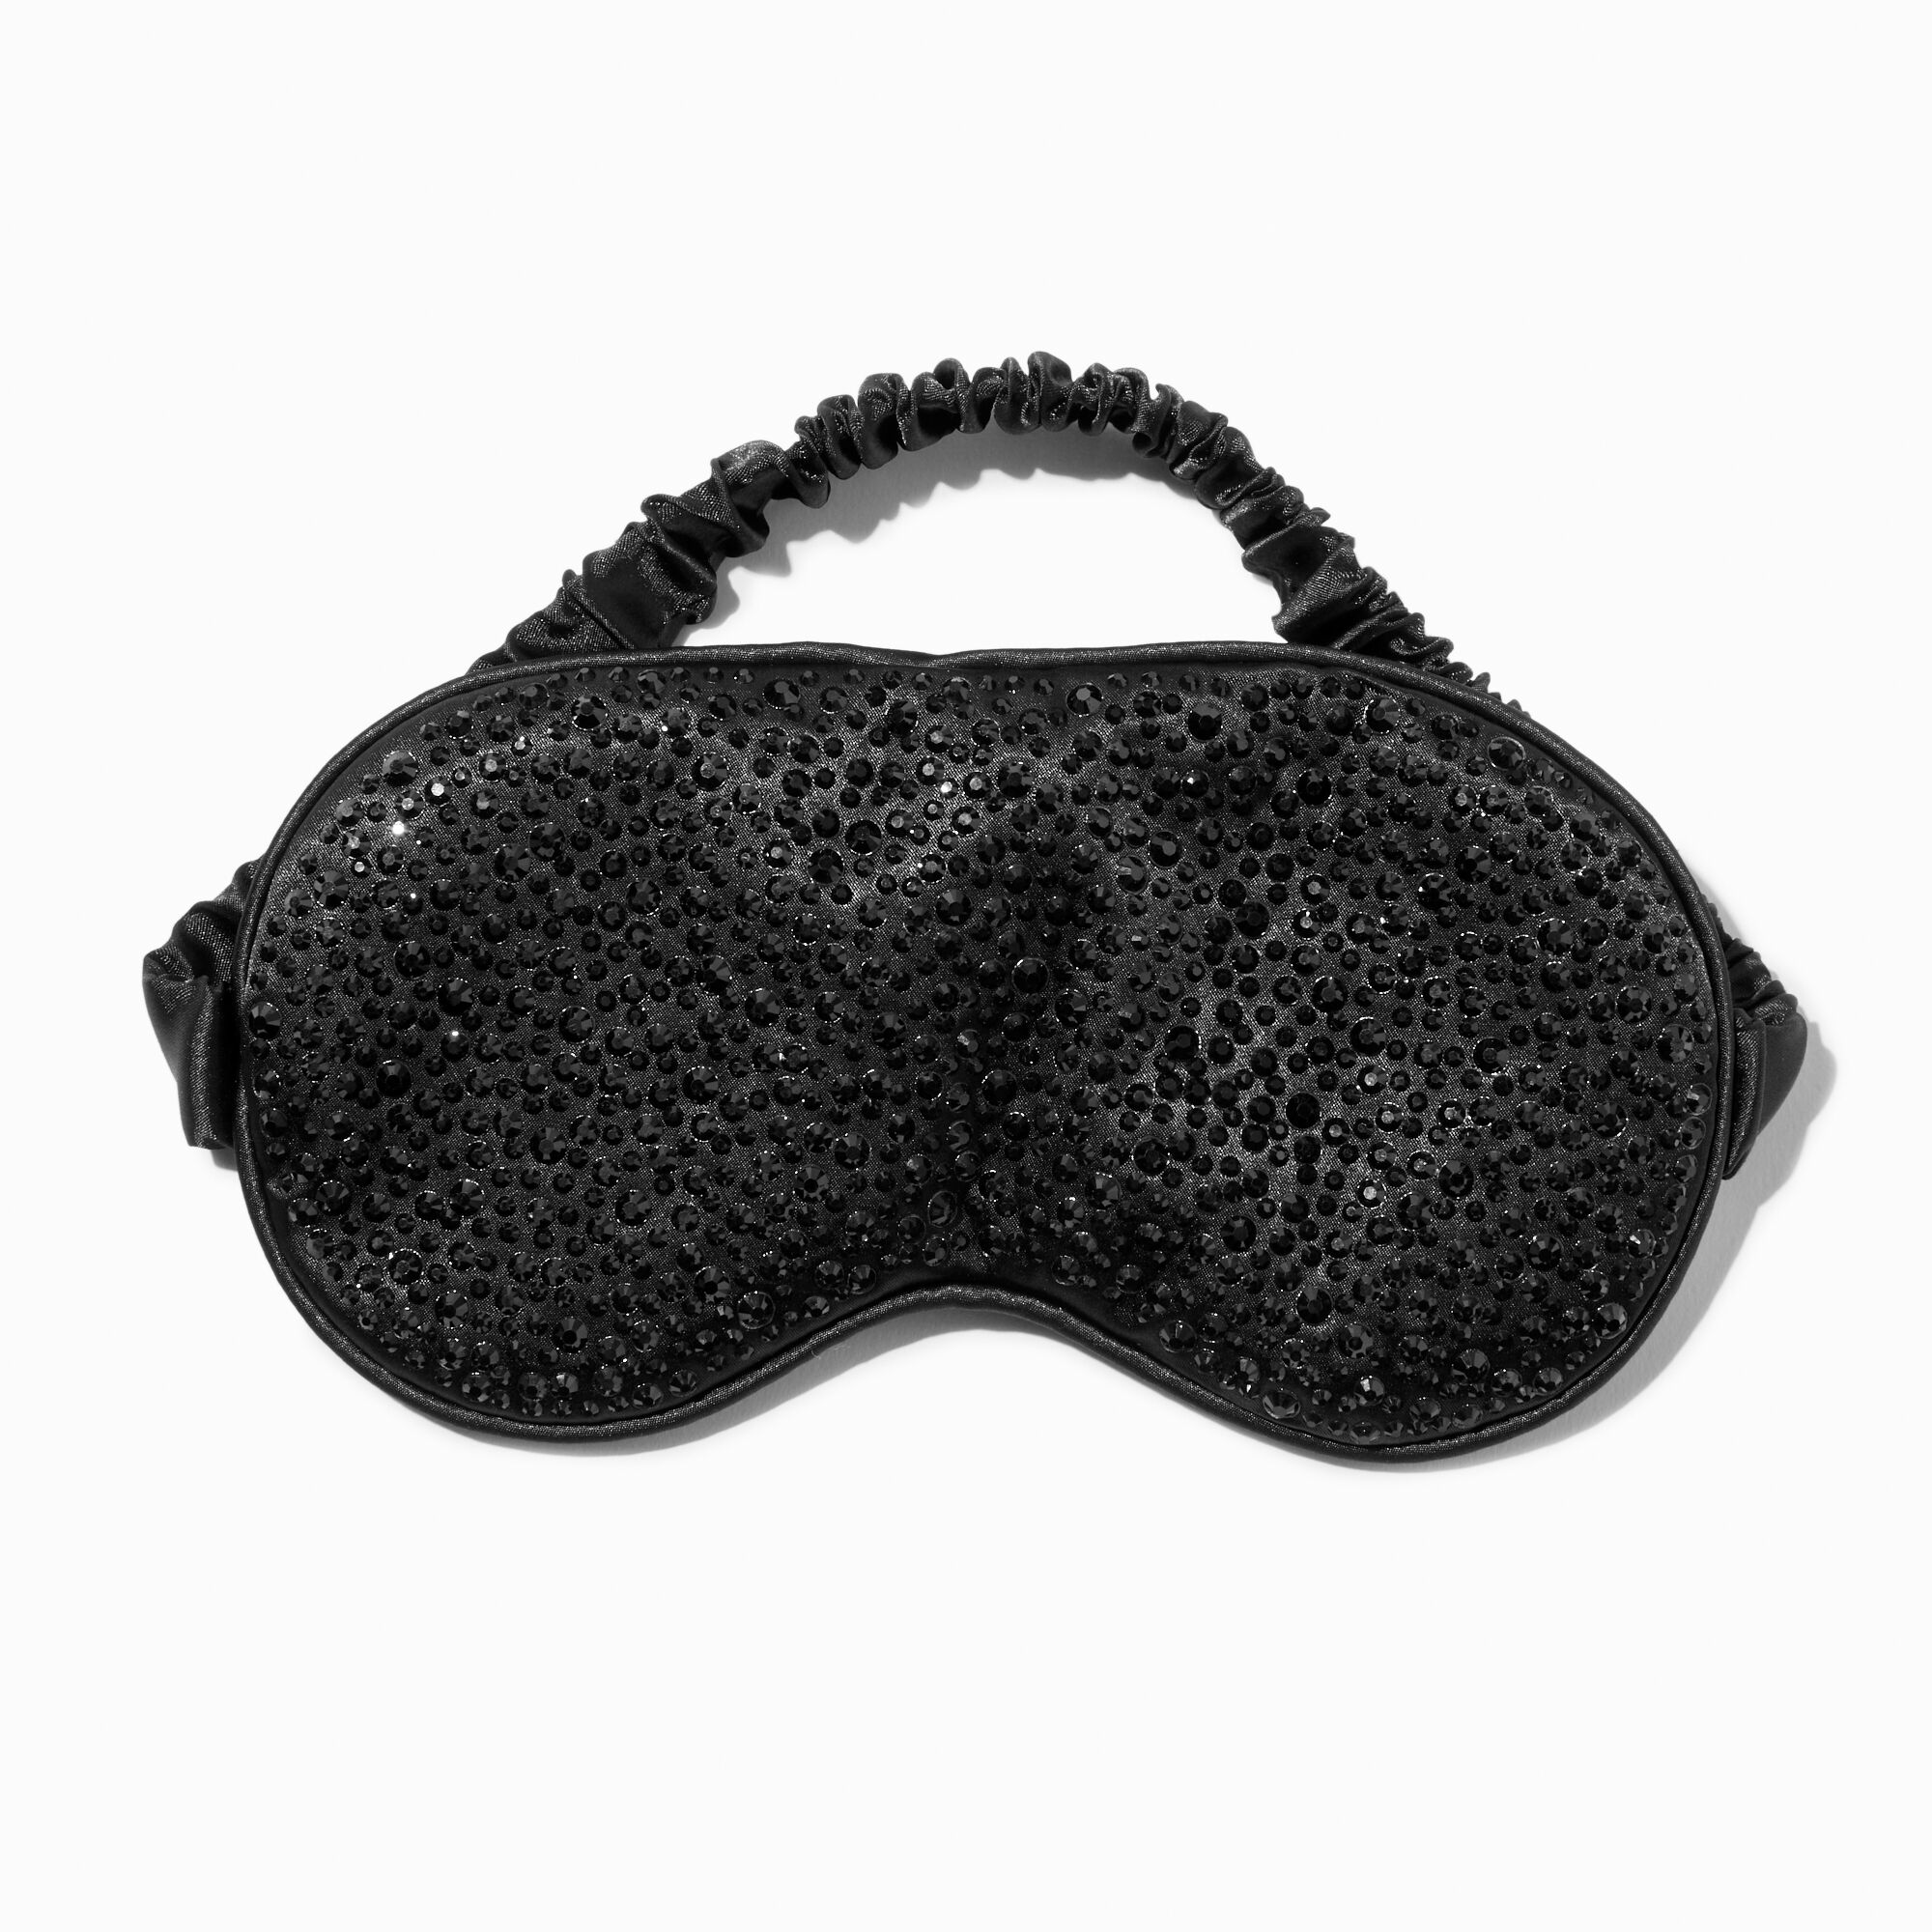 View Claires Bling Satin Sleeping Mask Black information